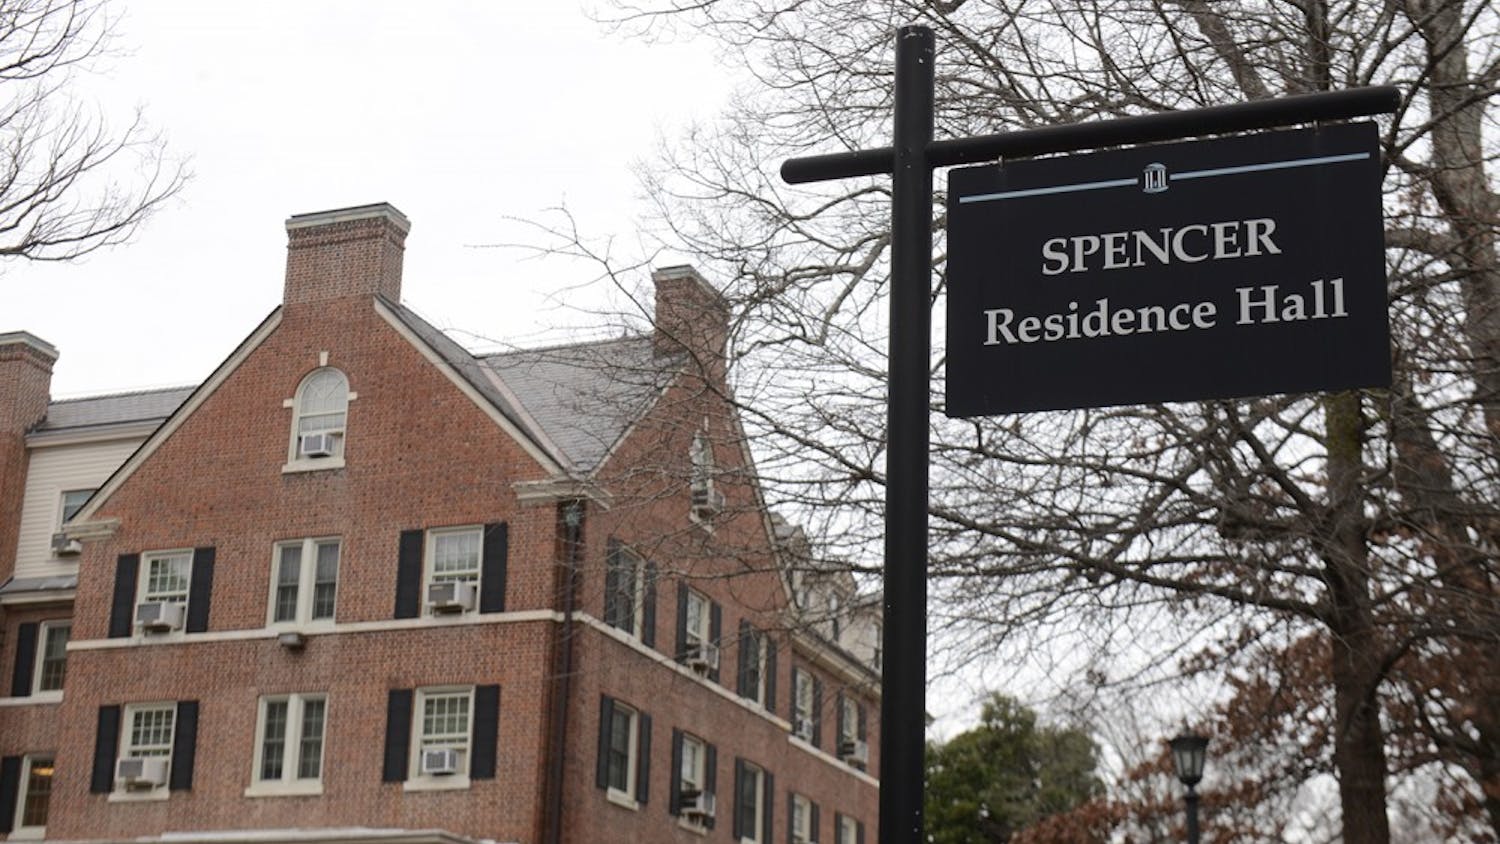 There was a successful break-in at Spencer Residence Hall over Winter break. Residents have received no further information outside the general Alert Carolina email.